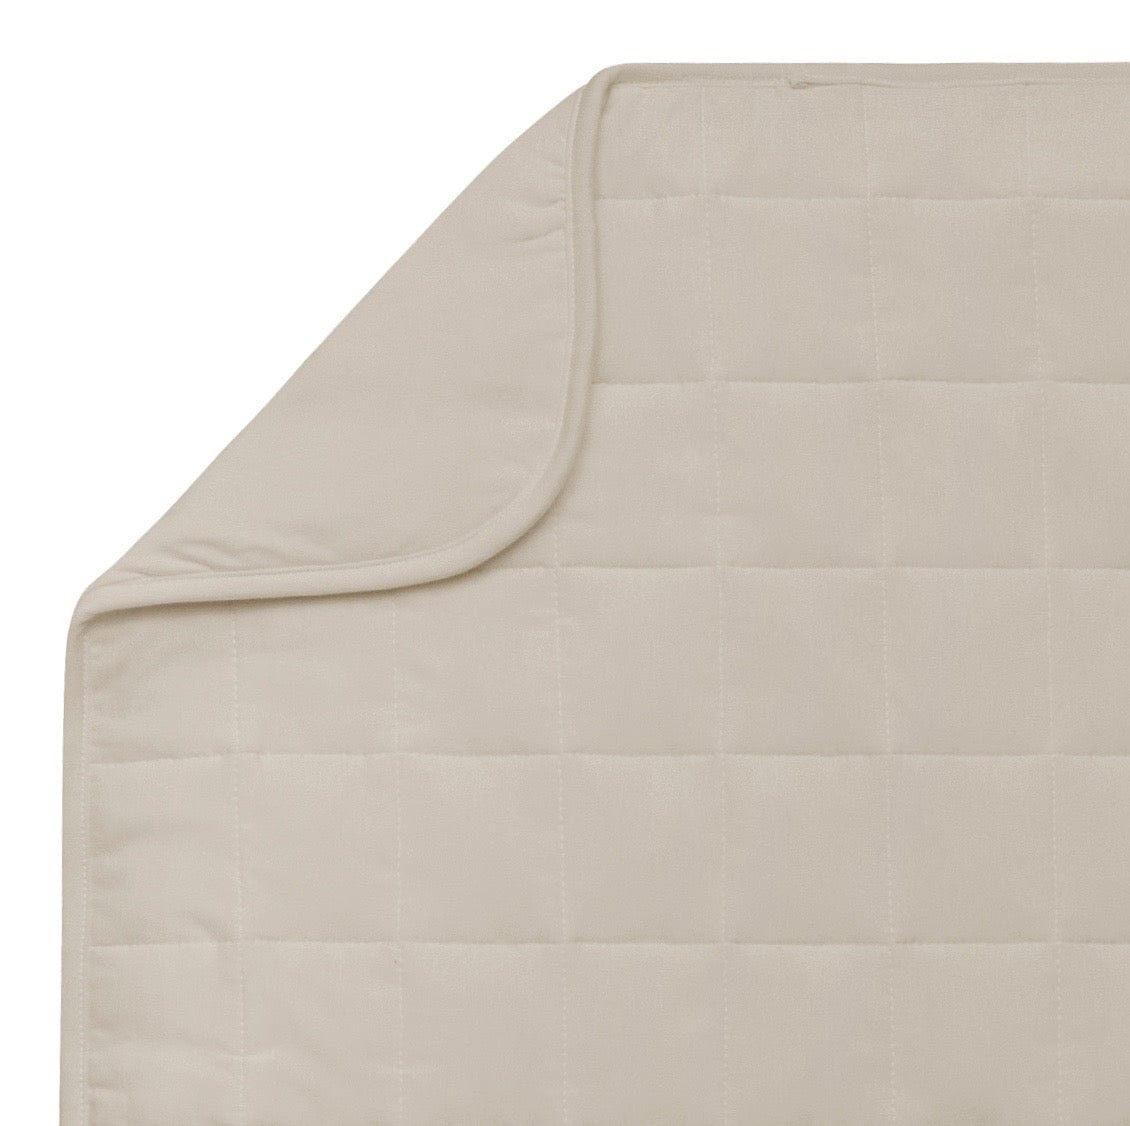 Kyte BABY Adult Blanket 1.0 Khaki / Adult Adult Quilted Blanket in Khaki 1.0